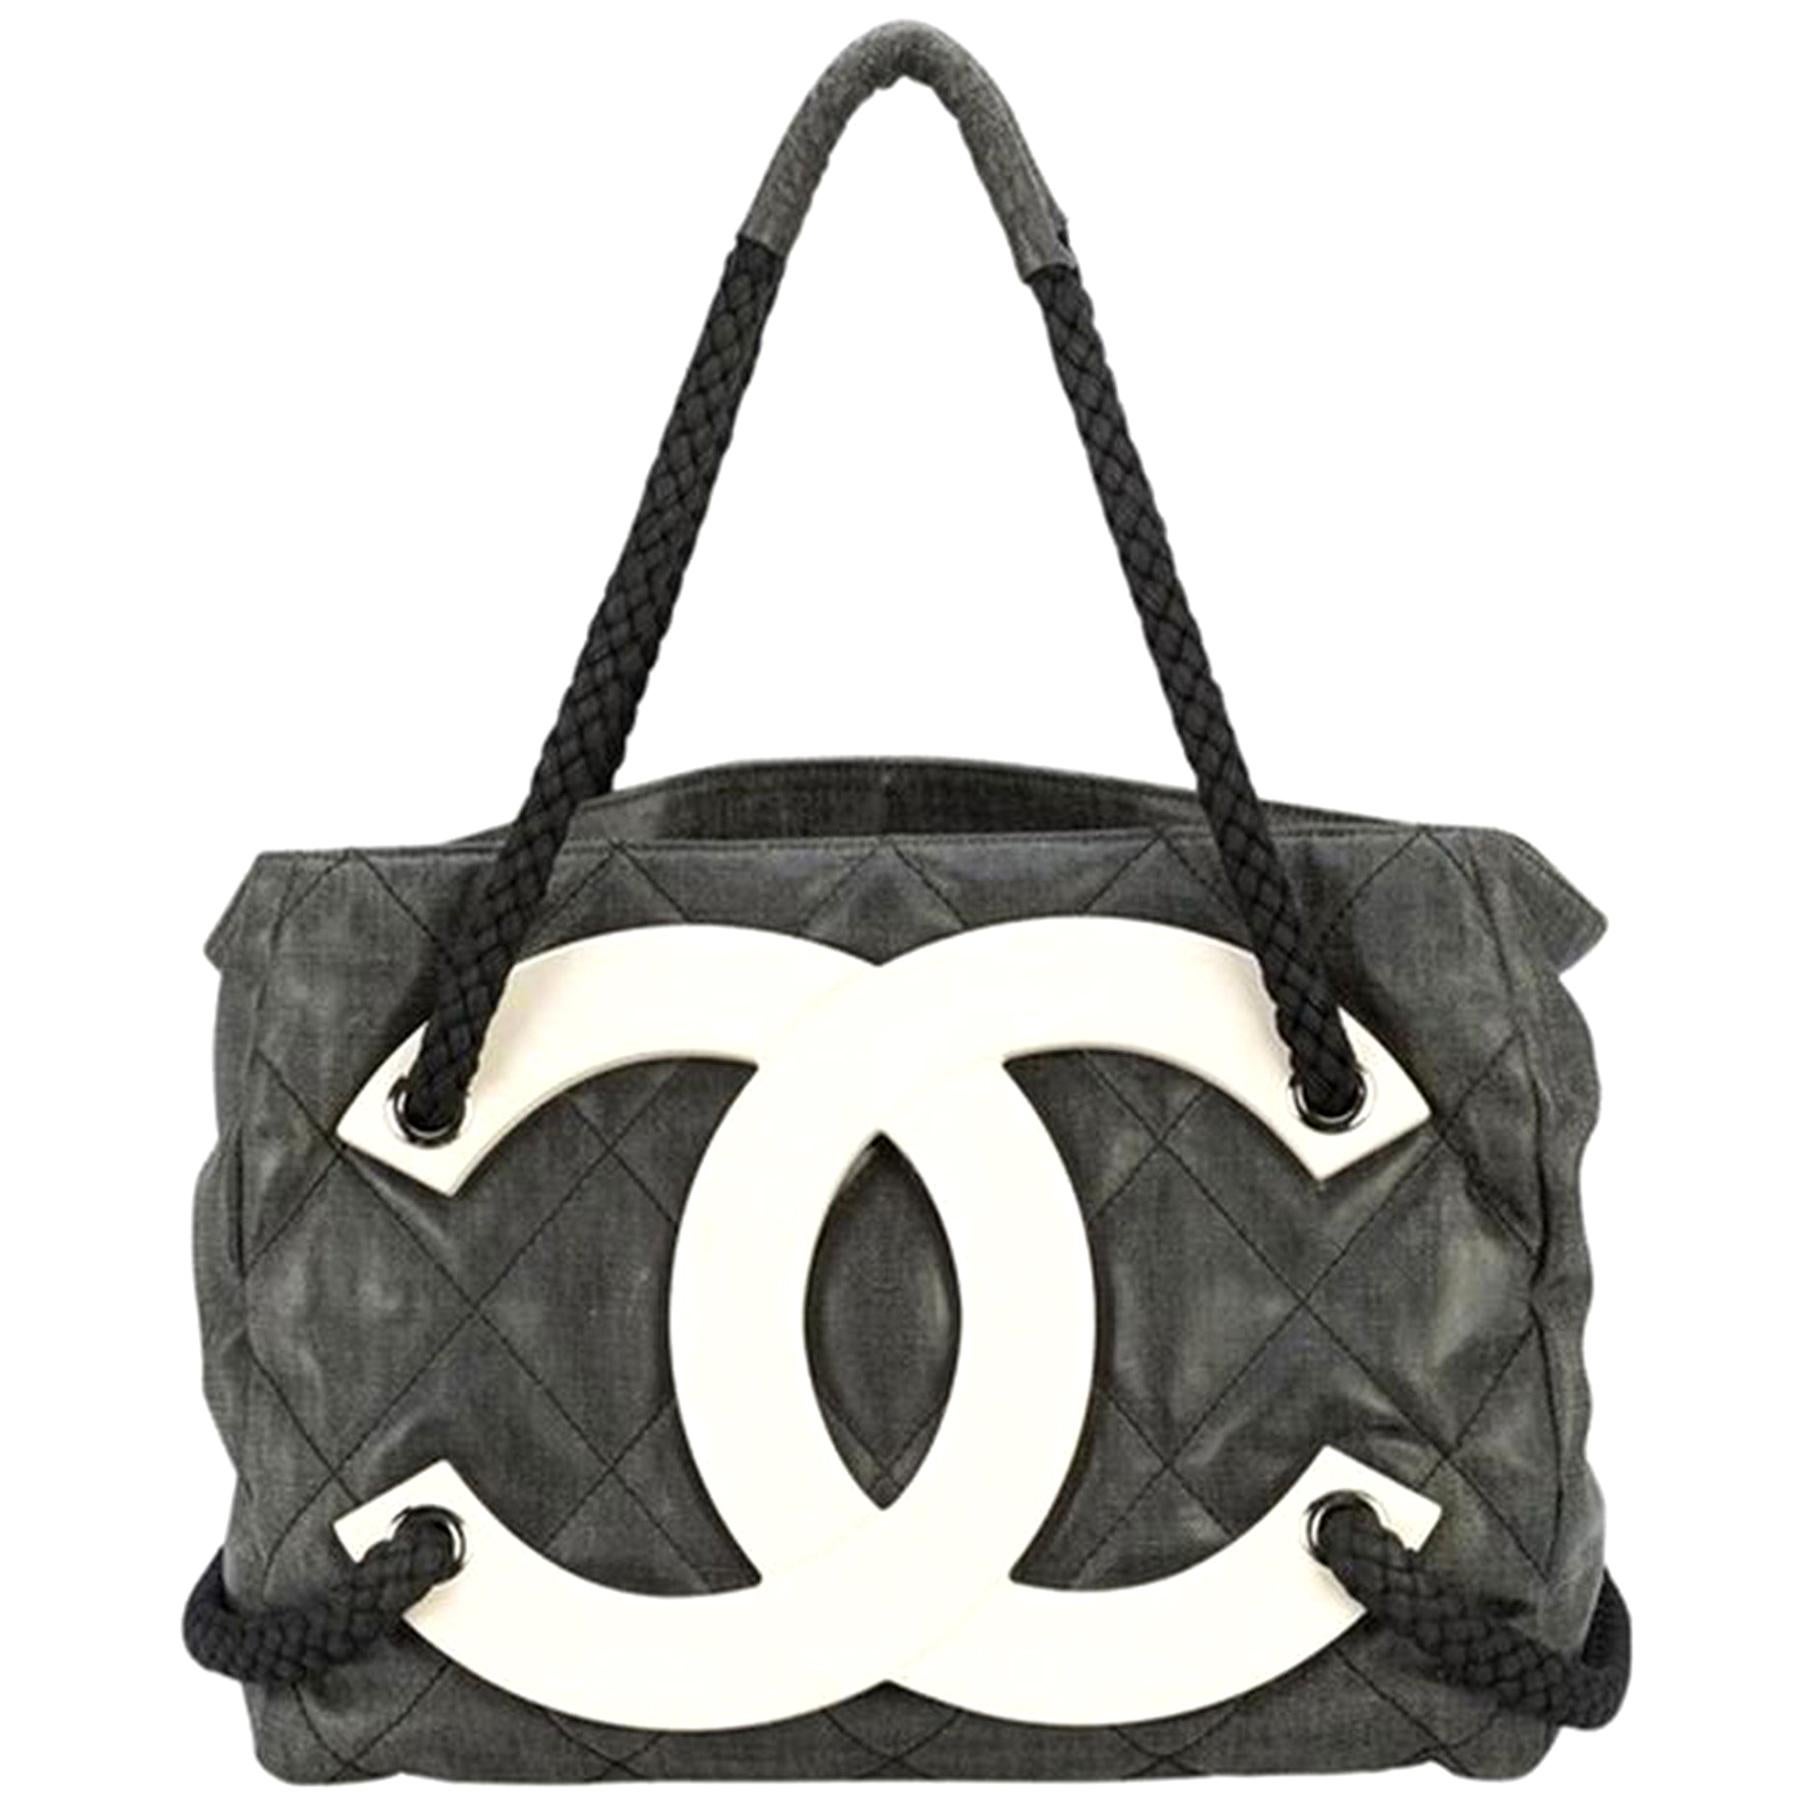 Chanel Rare Limited Edition Cruise Yacht Nautical Beach Black Coated Canvas Tote